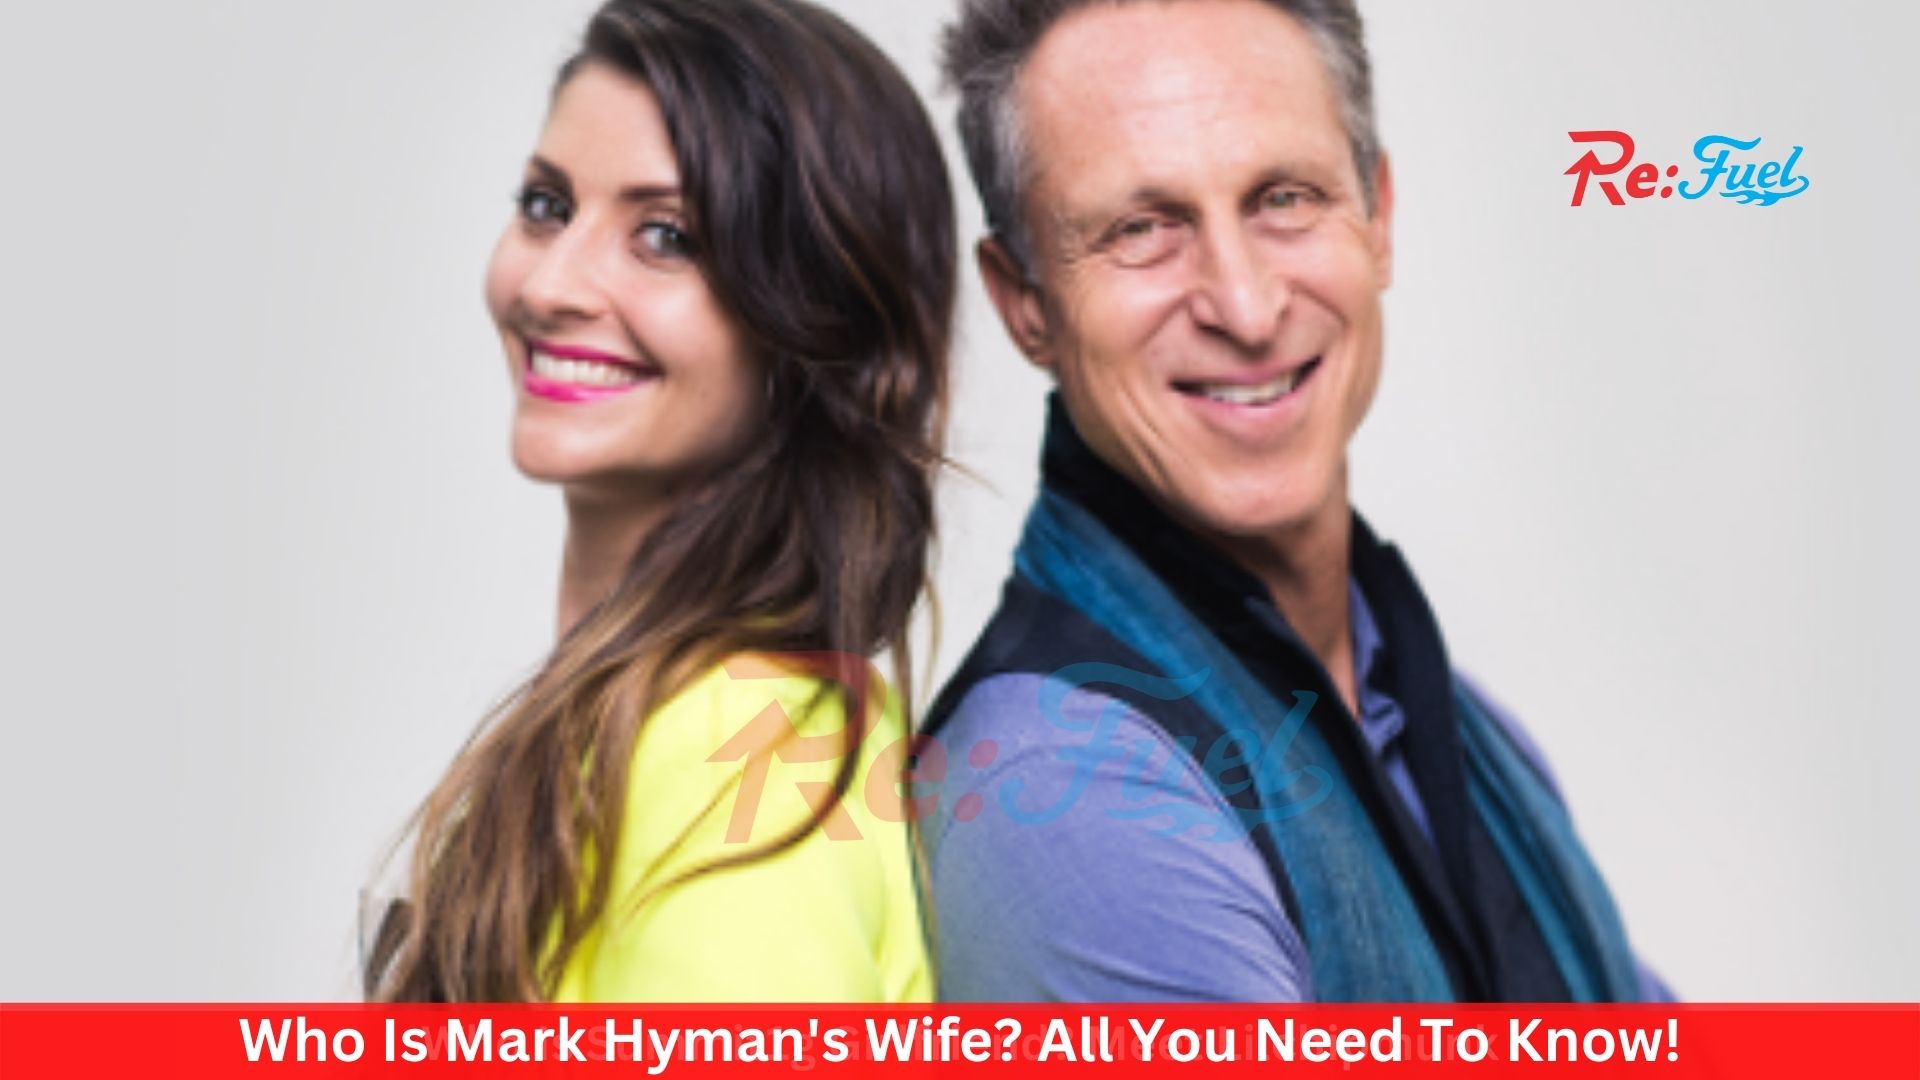 Who Is Mark Hyman's Wife? All You Need To Know!